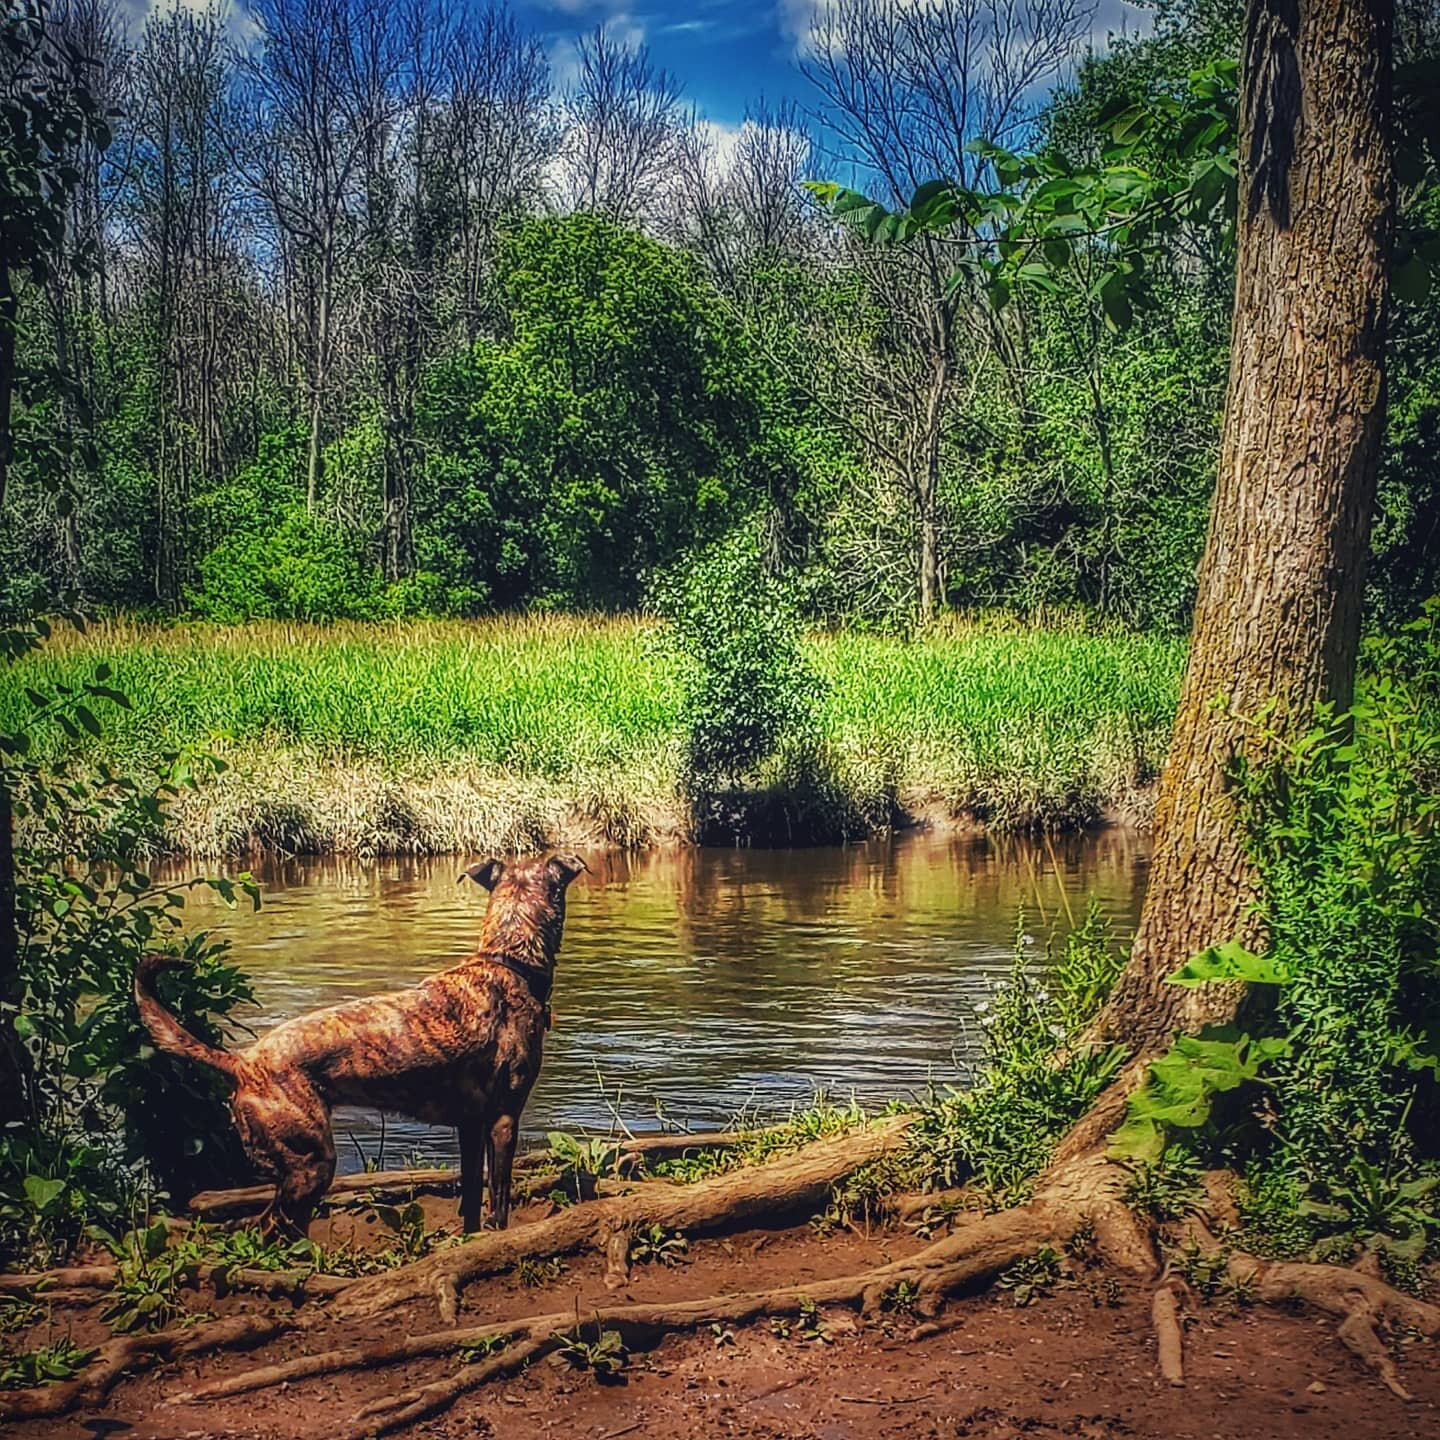 Pup has loved running and swimming in rivers and lakes this summer, so much so, she got a bit of bacteria in her ears. No more swimming this season. 
*
*
#dogsofinstagram #dogpark #riverdog #mkedogs #vetbills #doggo